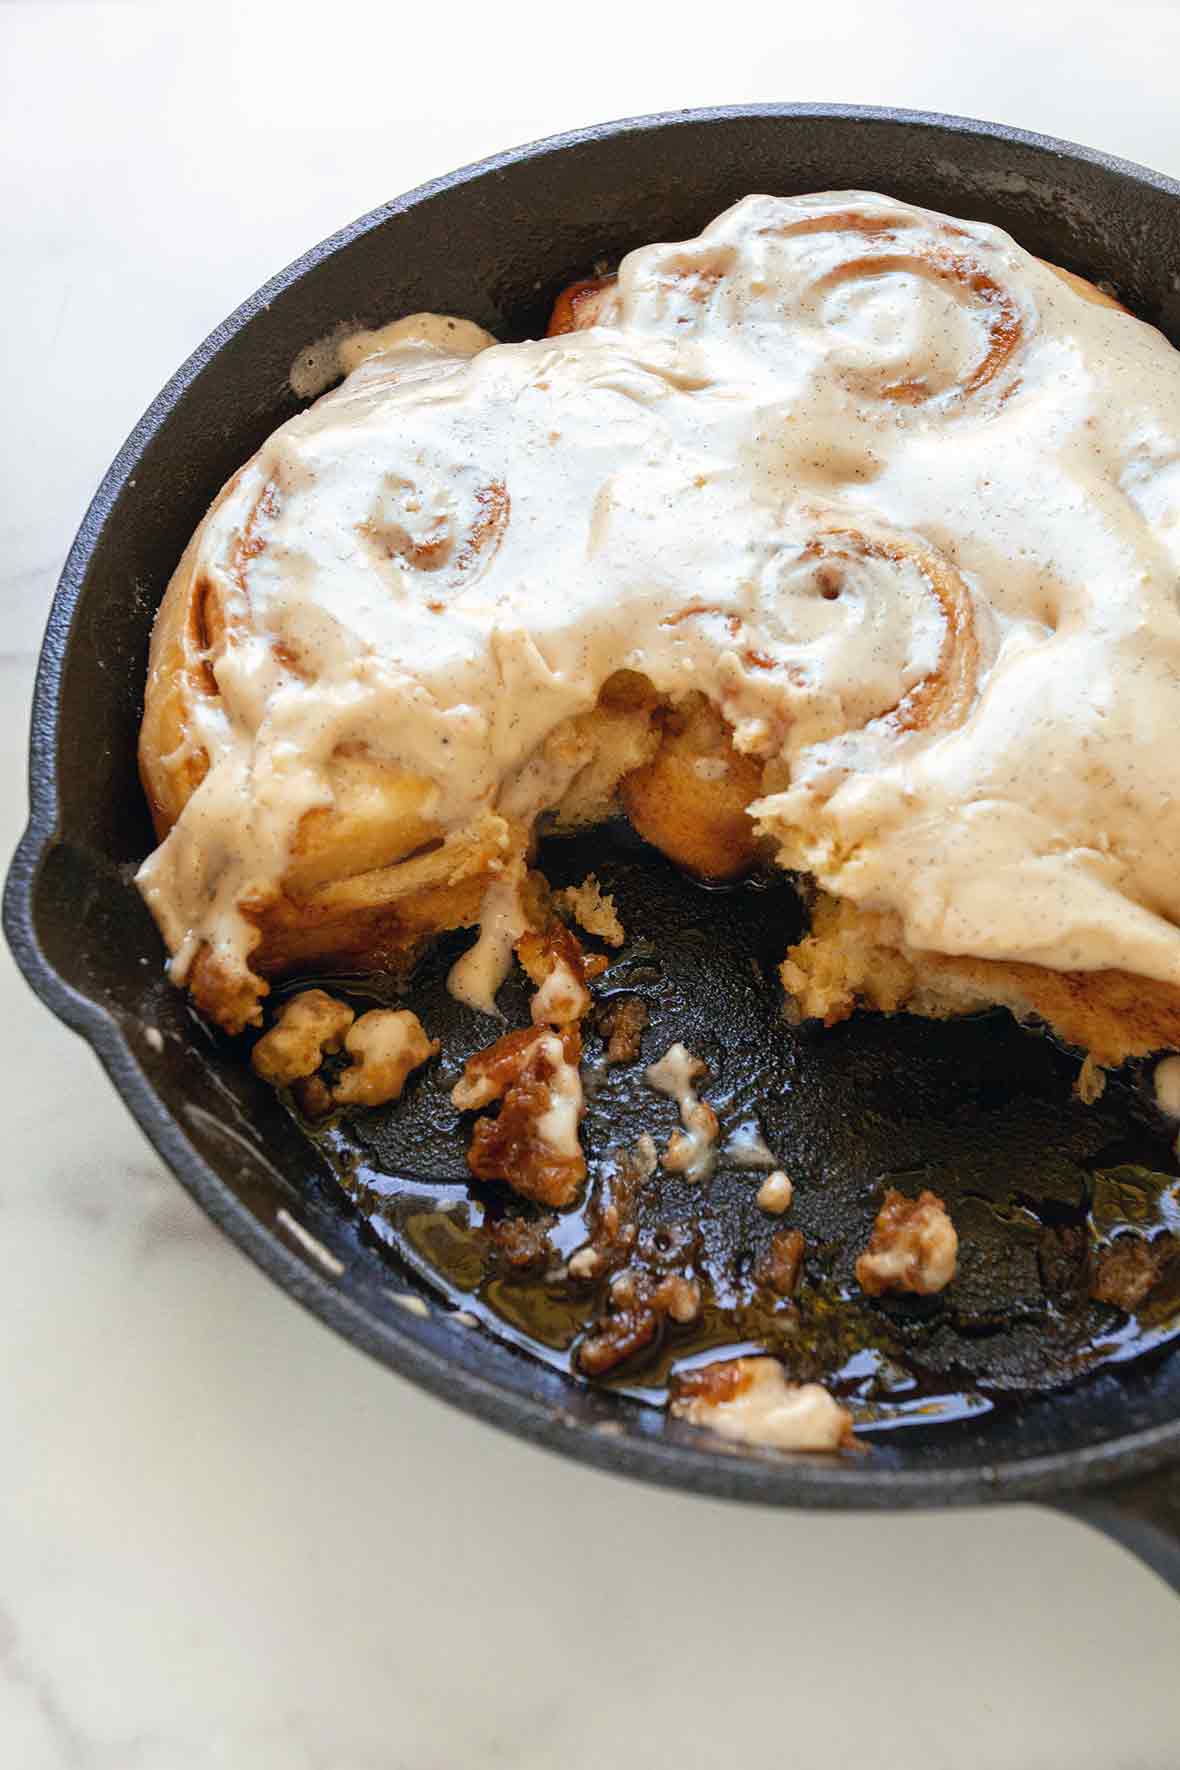 A cast-iron skillet half filled with skillet cinnamon rolls, the other half eaten.